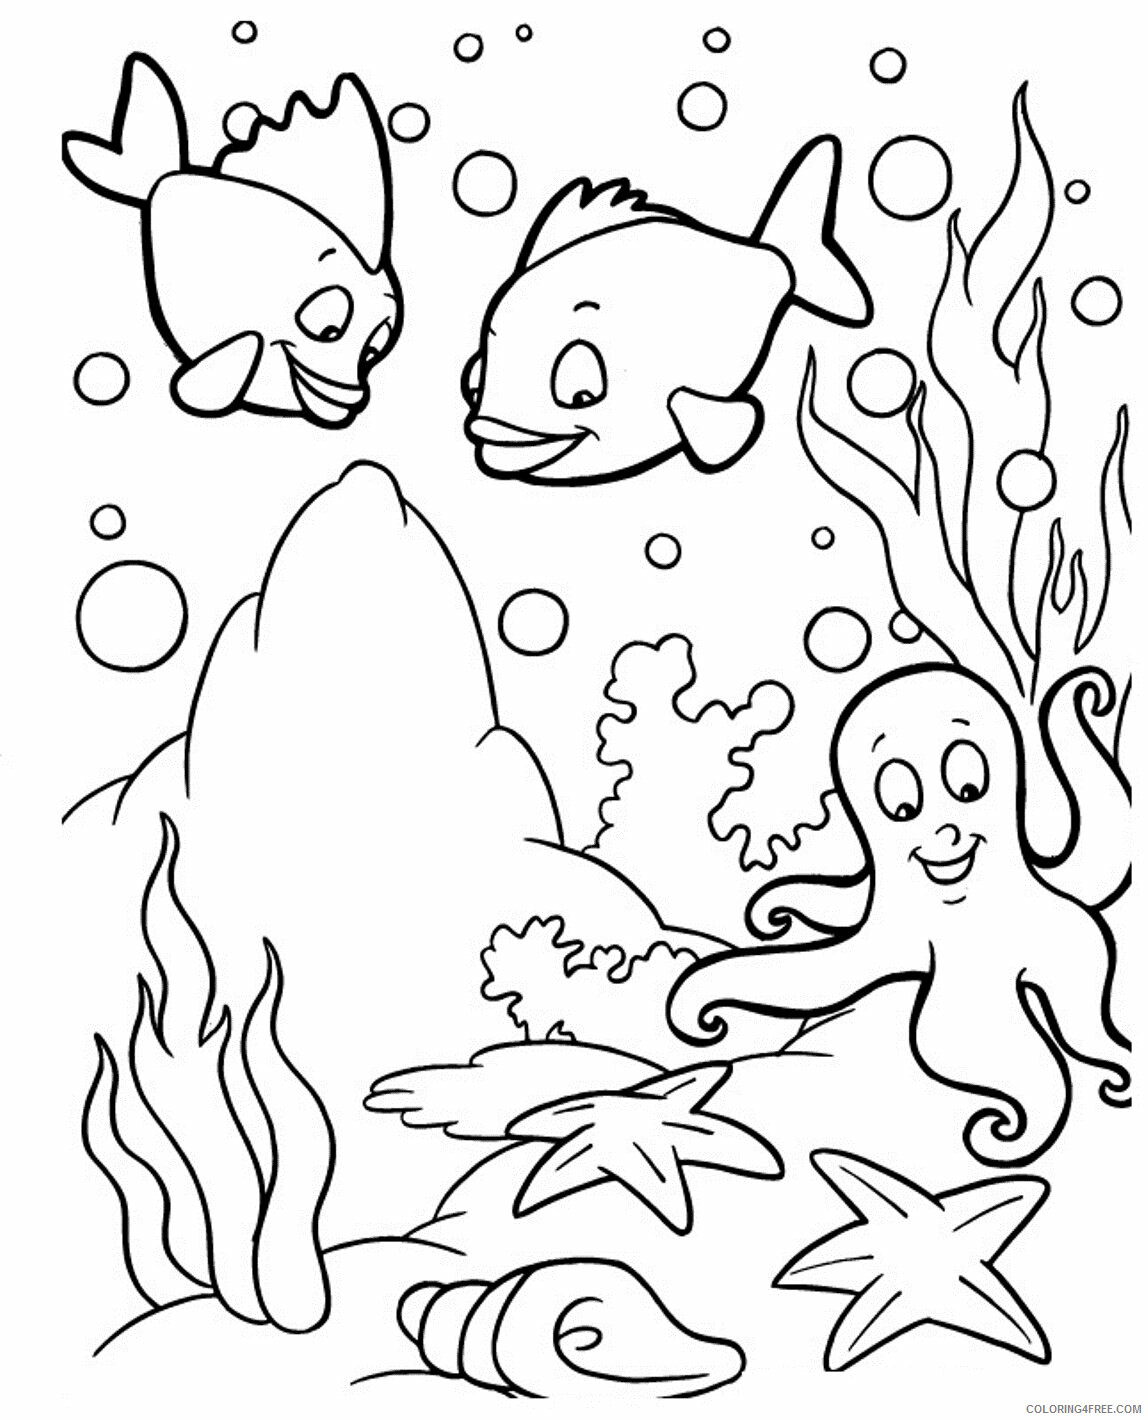 Animals Kids Coloring Pages Printable Sheets Amazing of Incridible Pages 2021 a 1014 Coloring4free